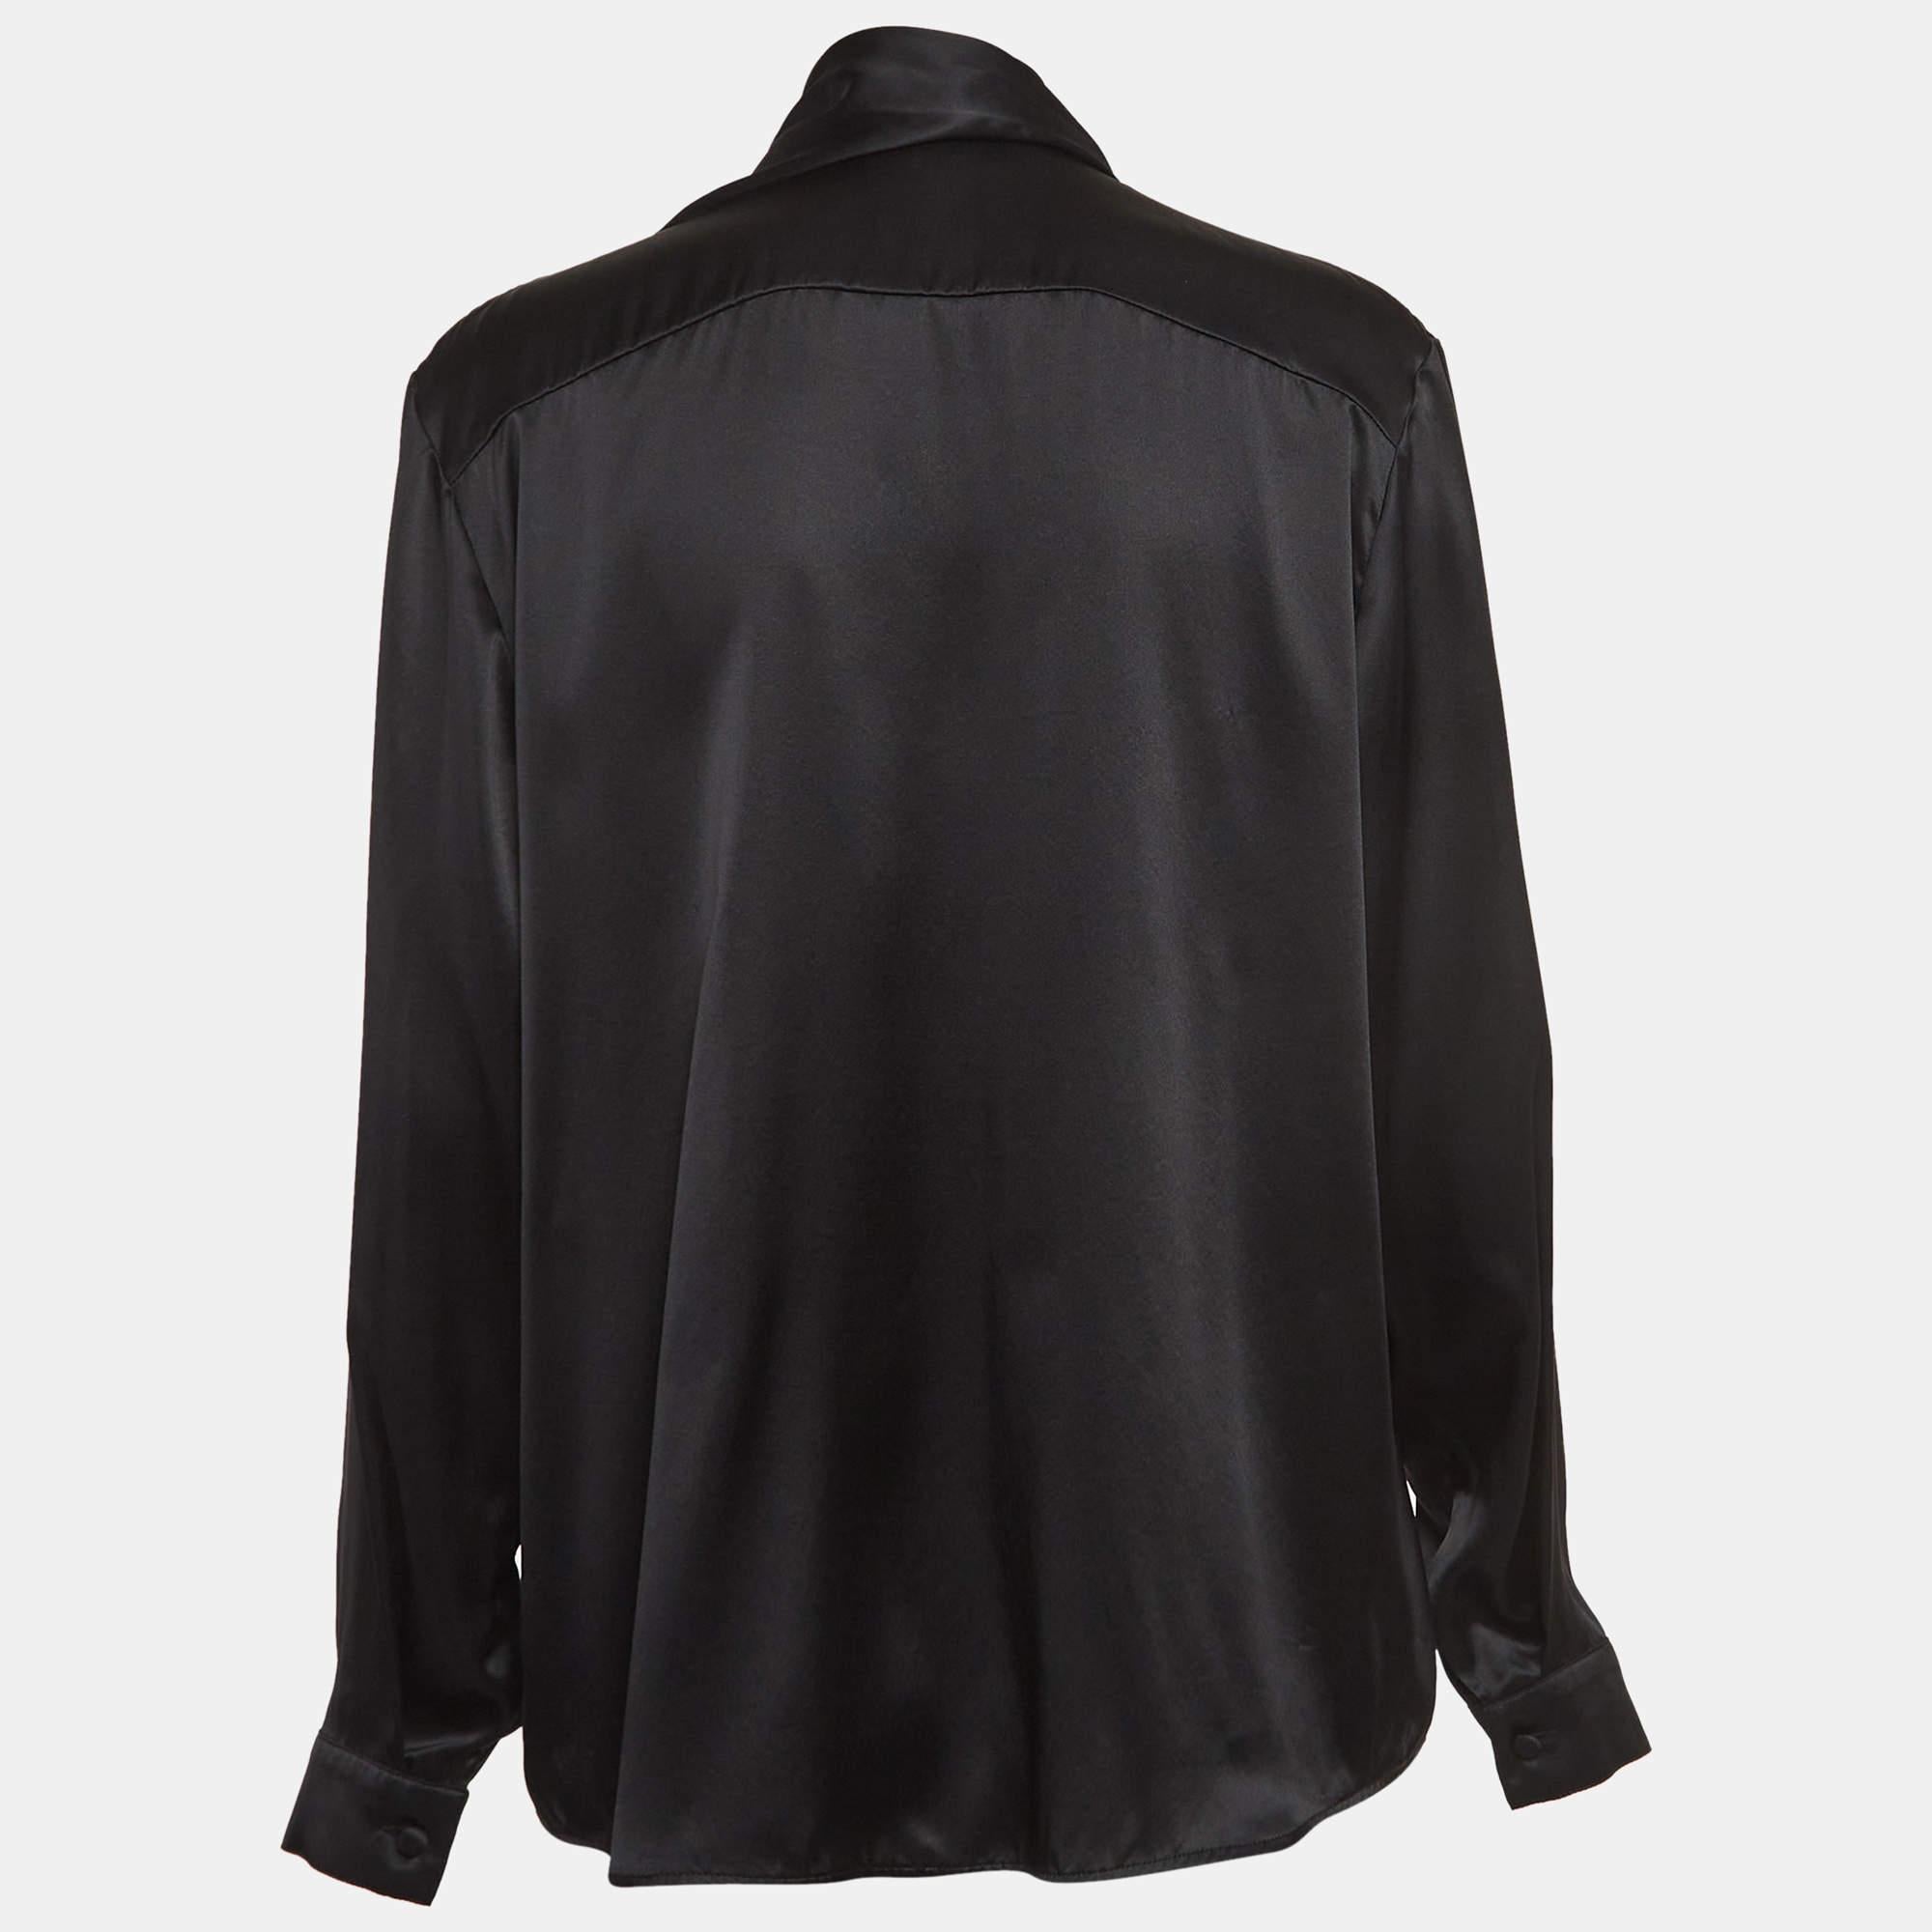 The Balenciaga shirt exudes sophistication and elegance. Crafted from luxurious satin silk, it features a unique tie-up neck design and a sleek button-front silhouette. This shirt effortlessly combines contemporary style with timeless refinement,